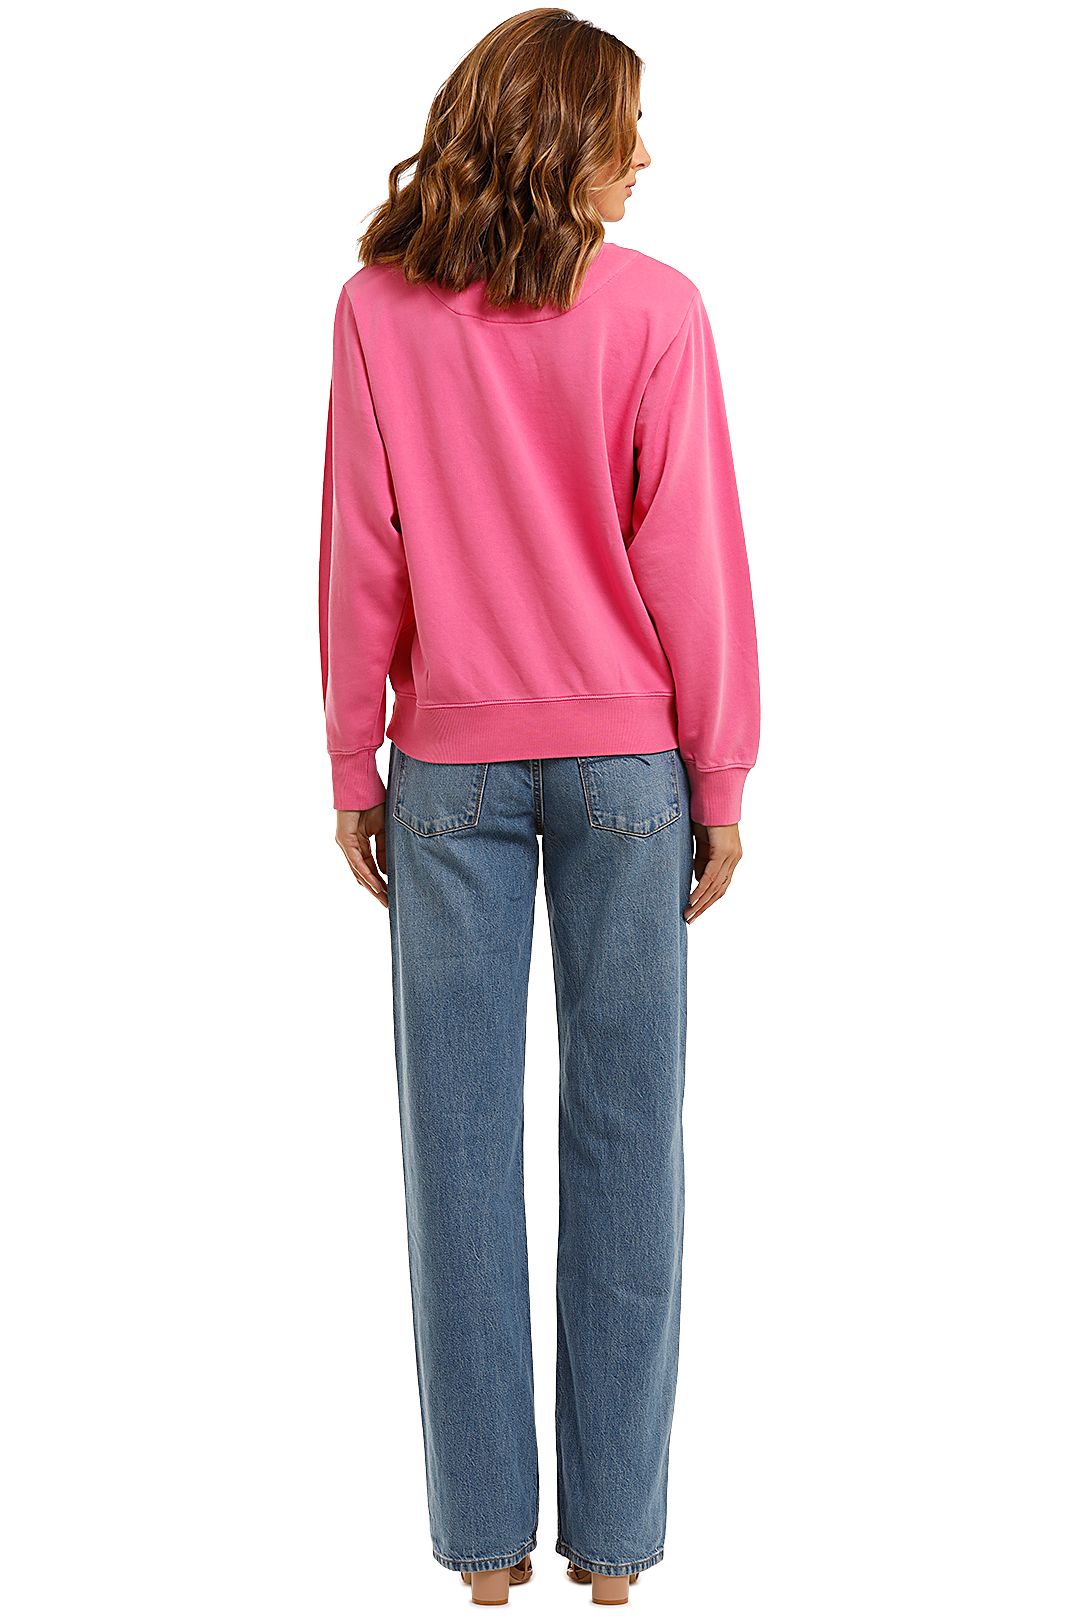 Country Road Heritage Sweat French Rose Pink